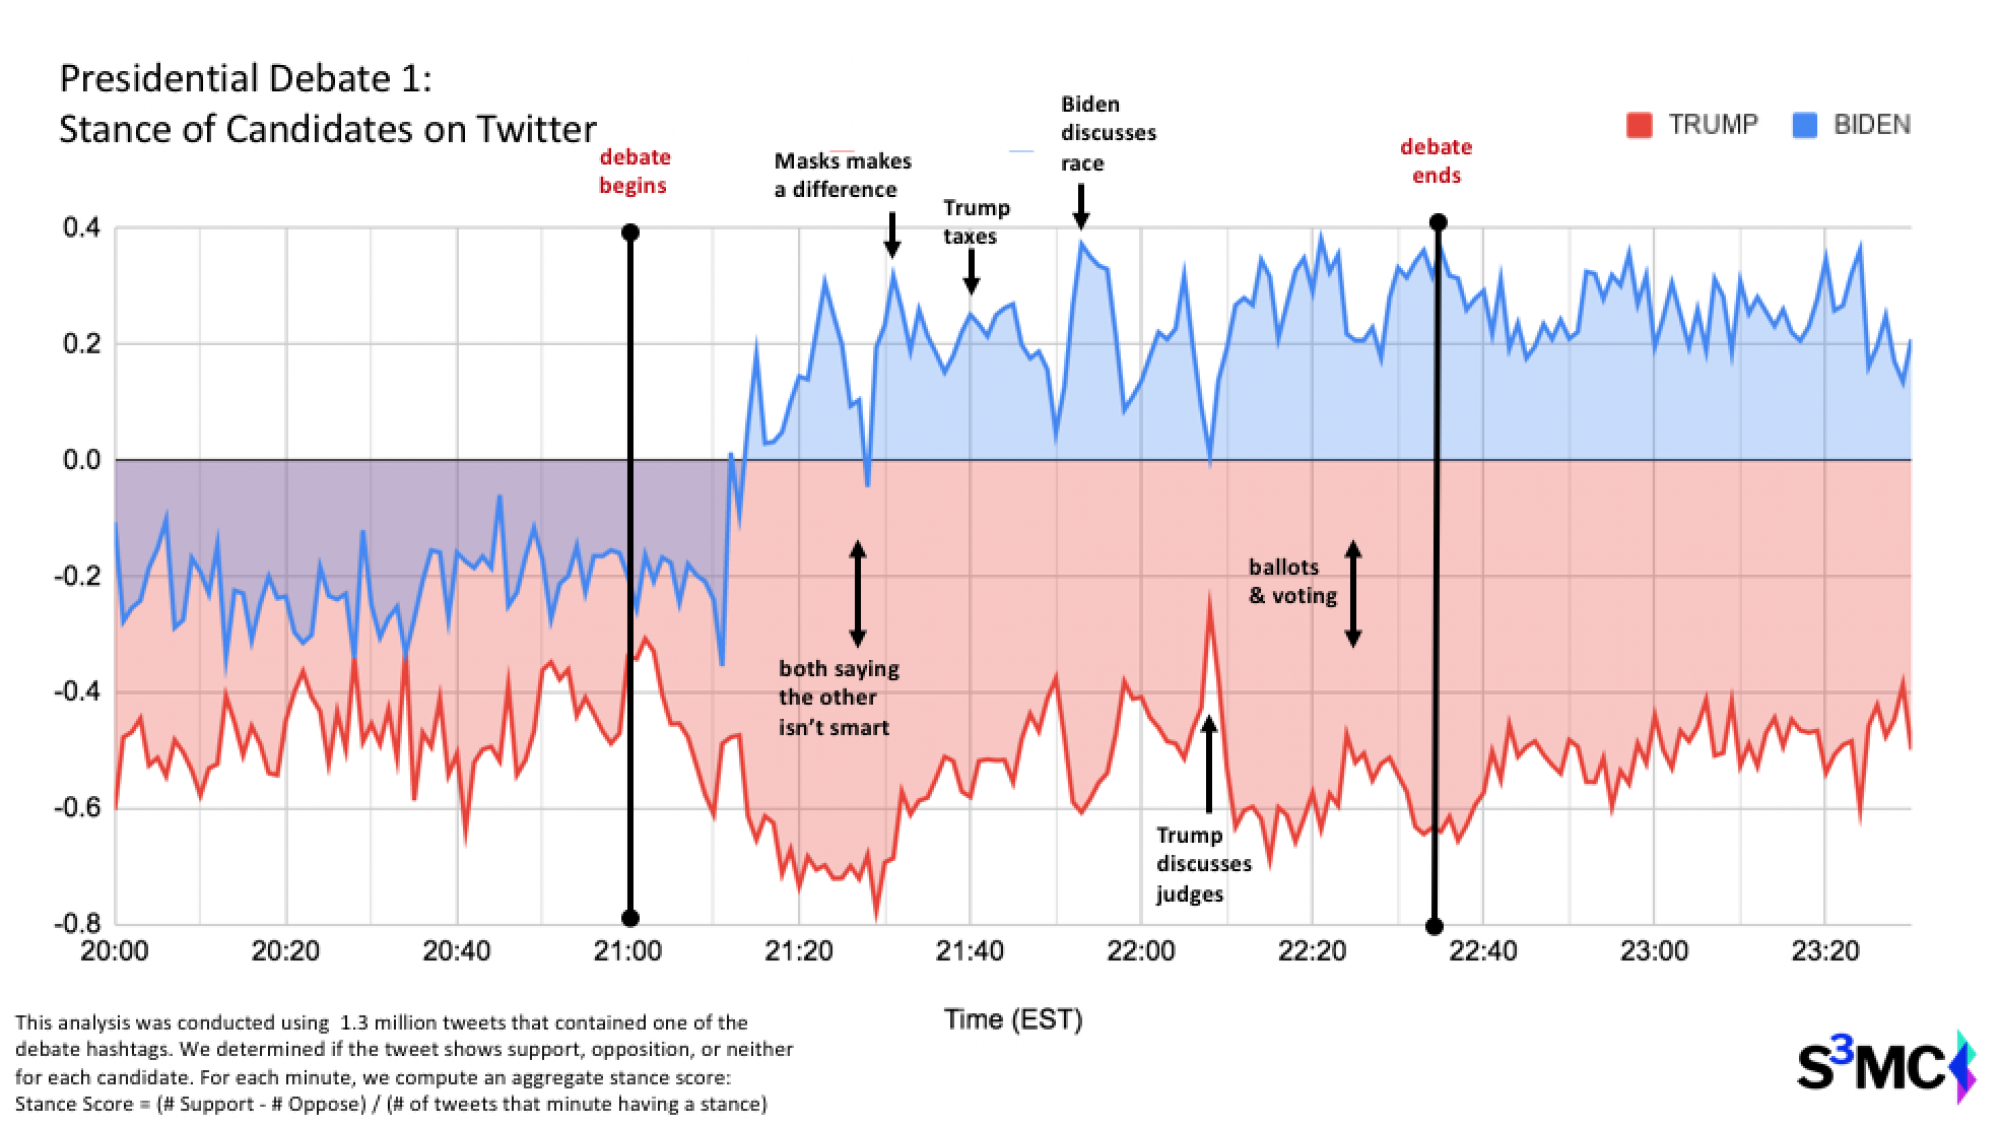 A visual representation of an aggregate stance score (support - oppose) divided by total tweets with a stance. It shows changes over time based on debate topic